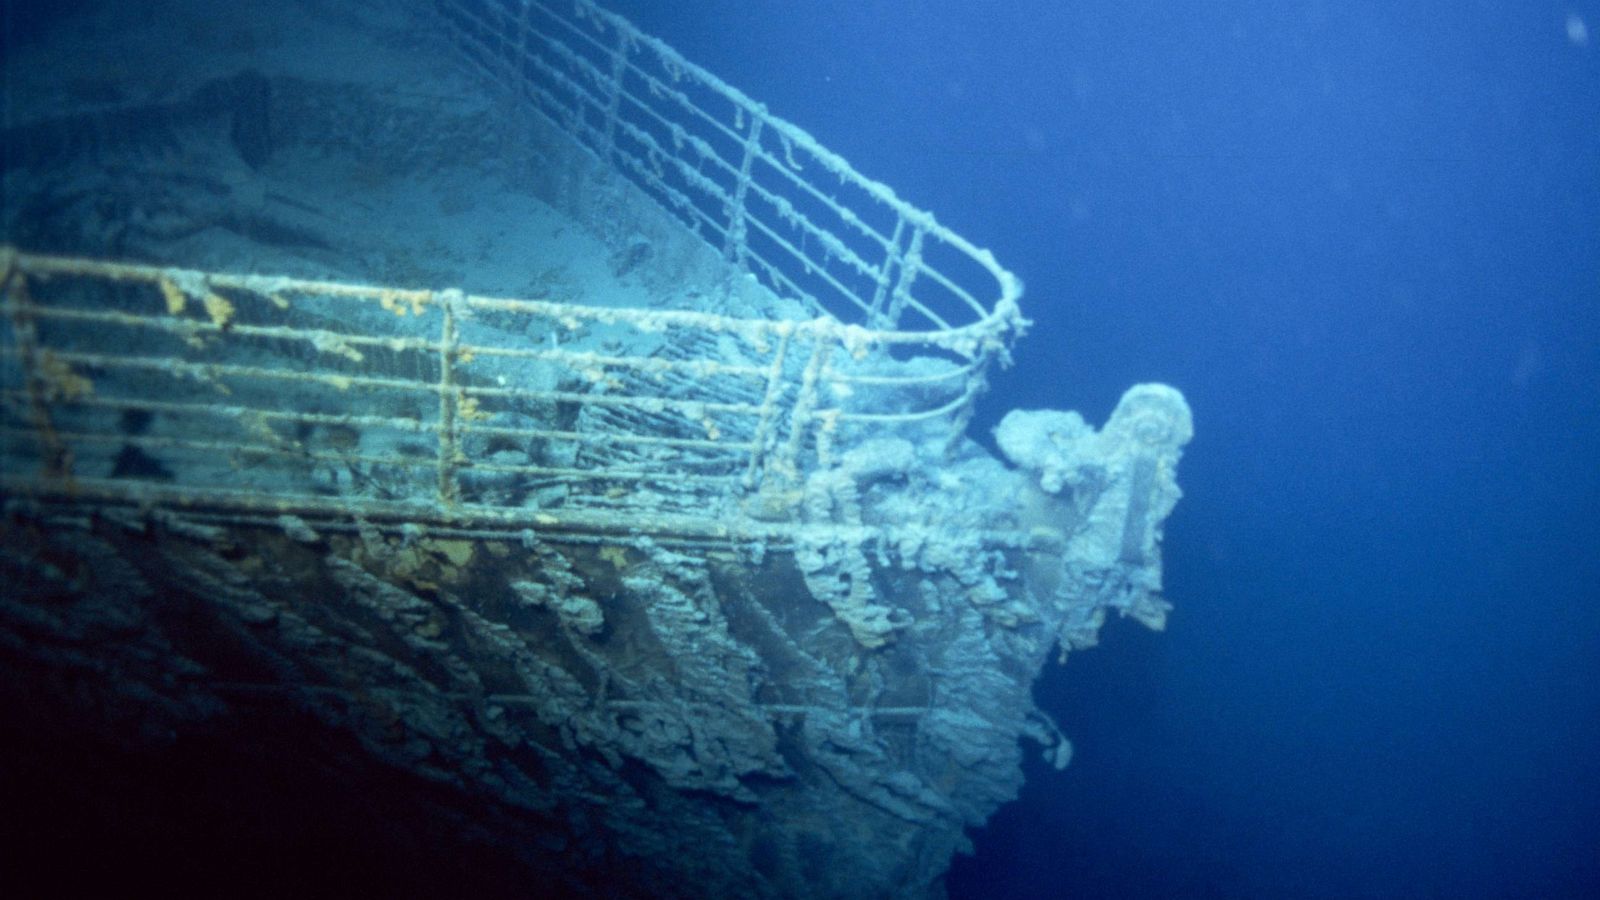 Stuck in the propeller of Titanic, former ABC News science editor recalls  submersible trip to wreckage - ABC News